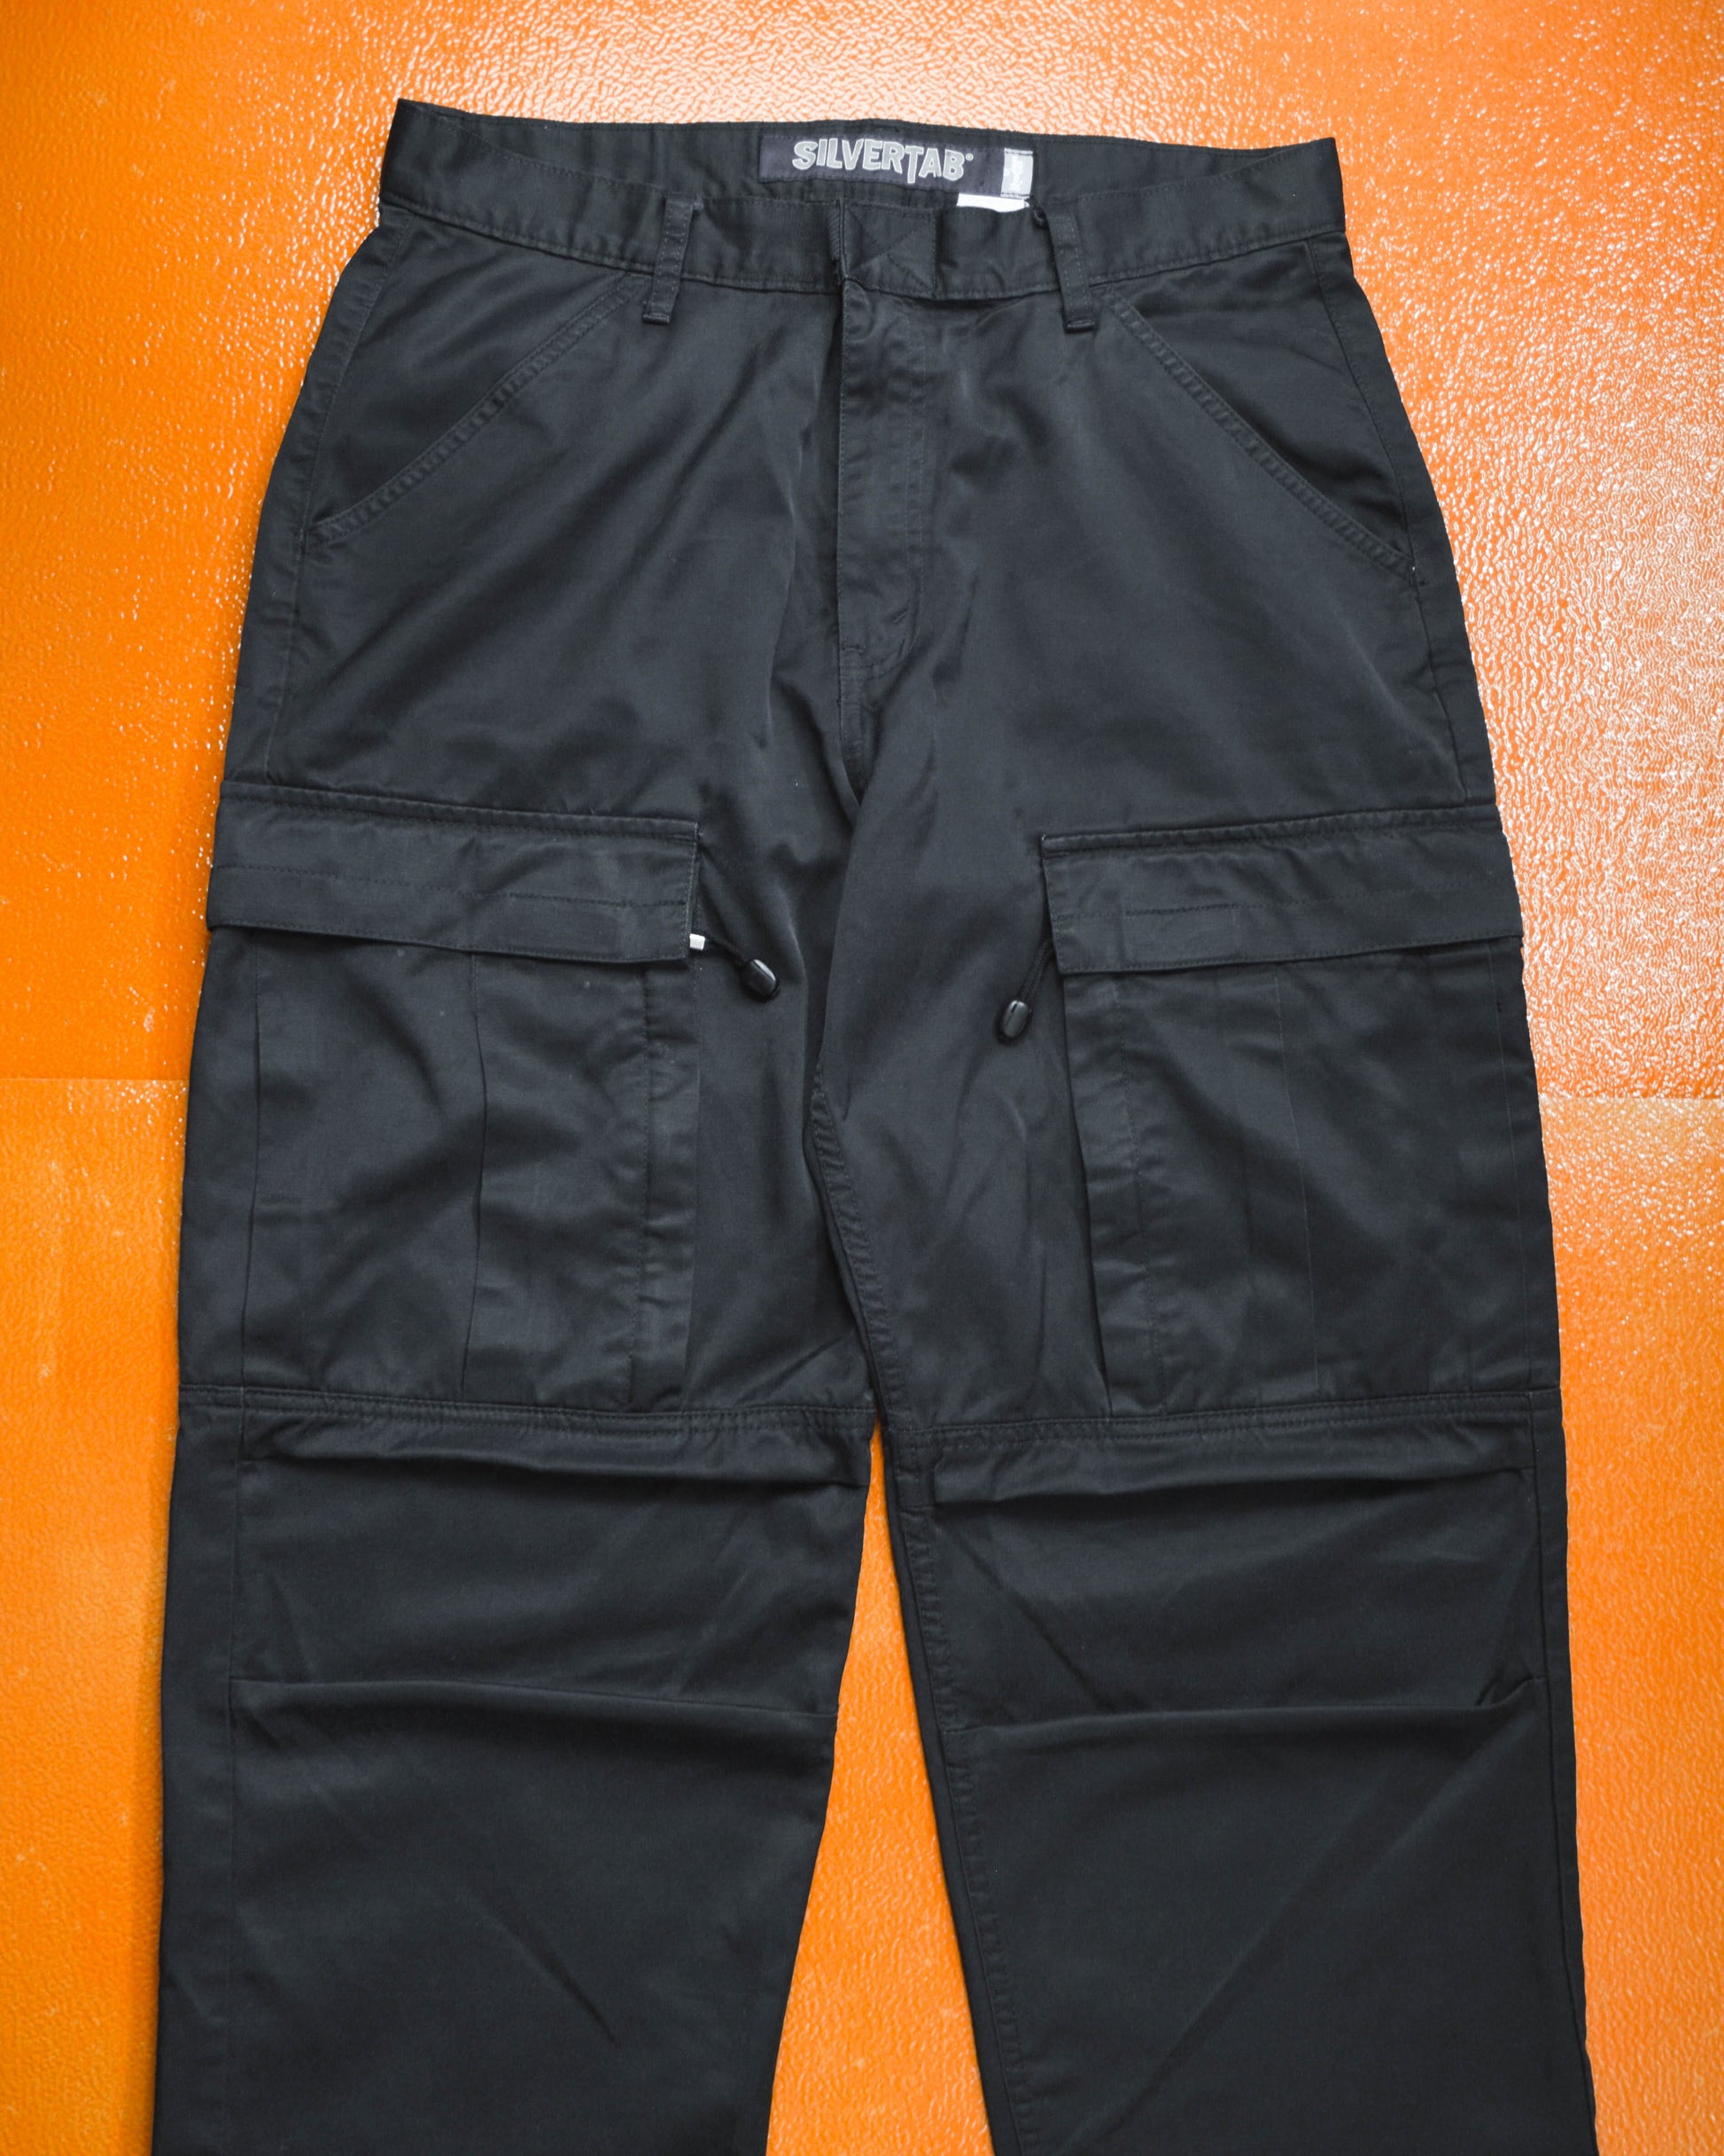 Levi's Silvertab Wide Tactical Black Cargo Pants (32~34)